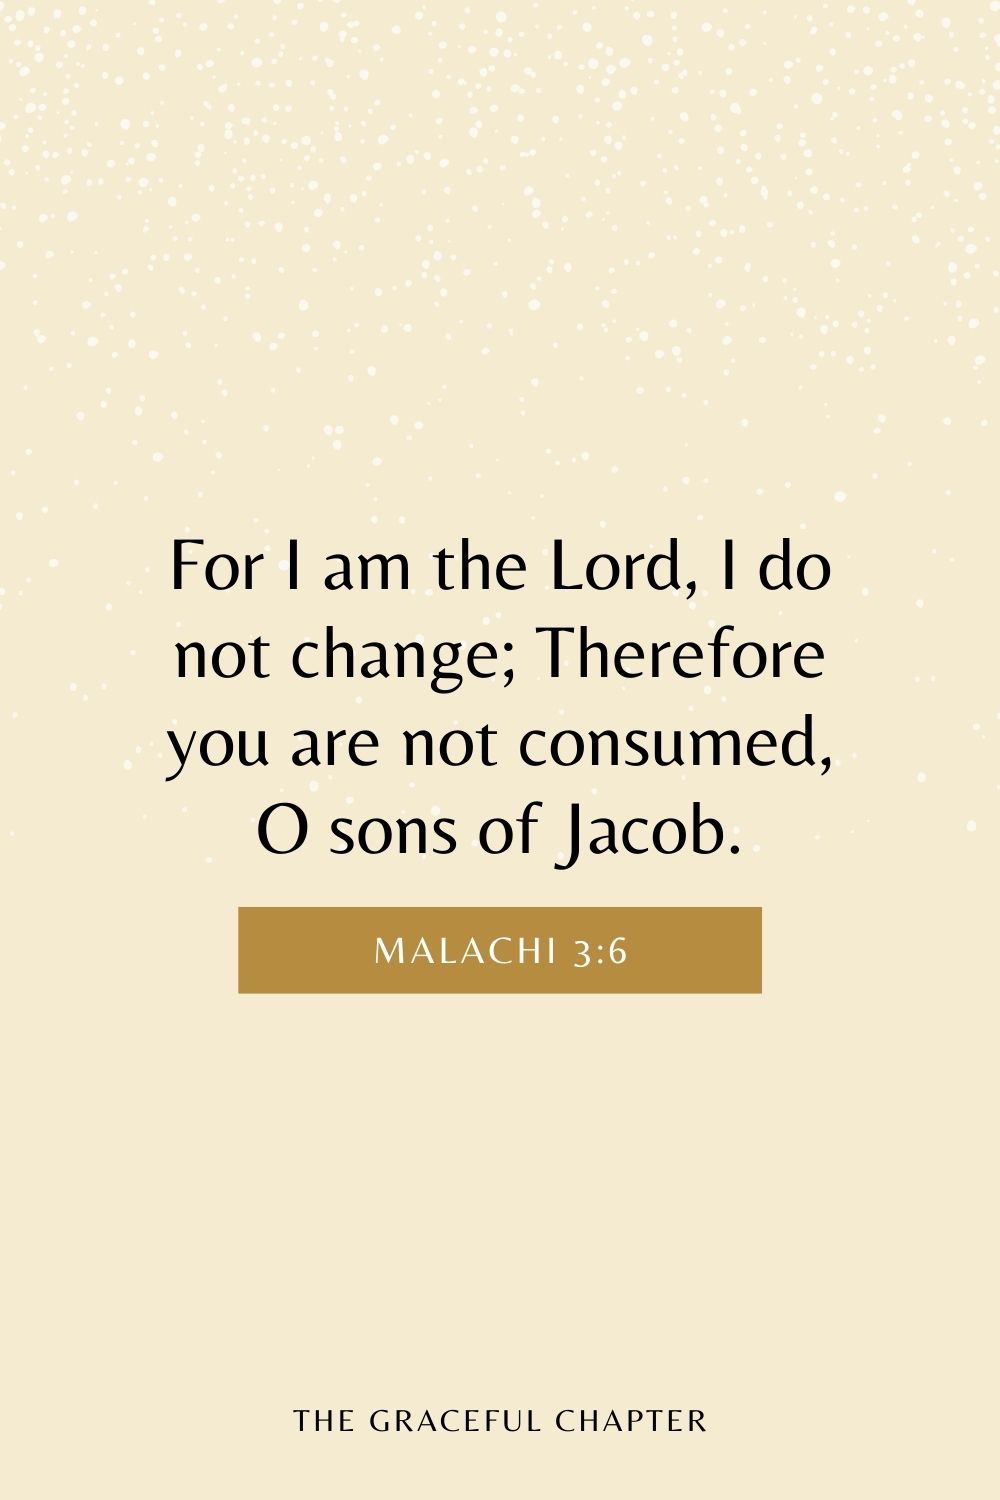 For I am the Lord, I do not change; Therefore you are not consumed, O sons of Jacob. Malachi 3:6